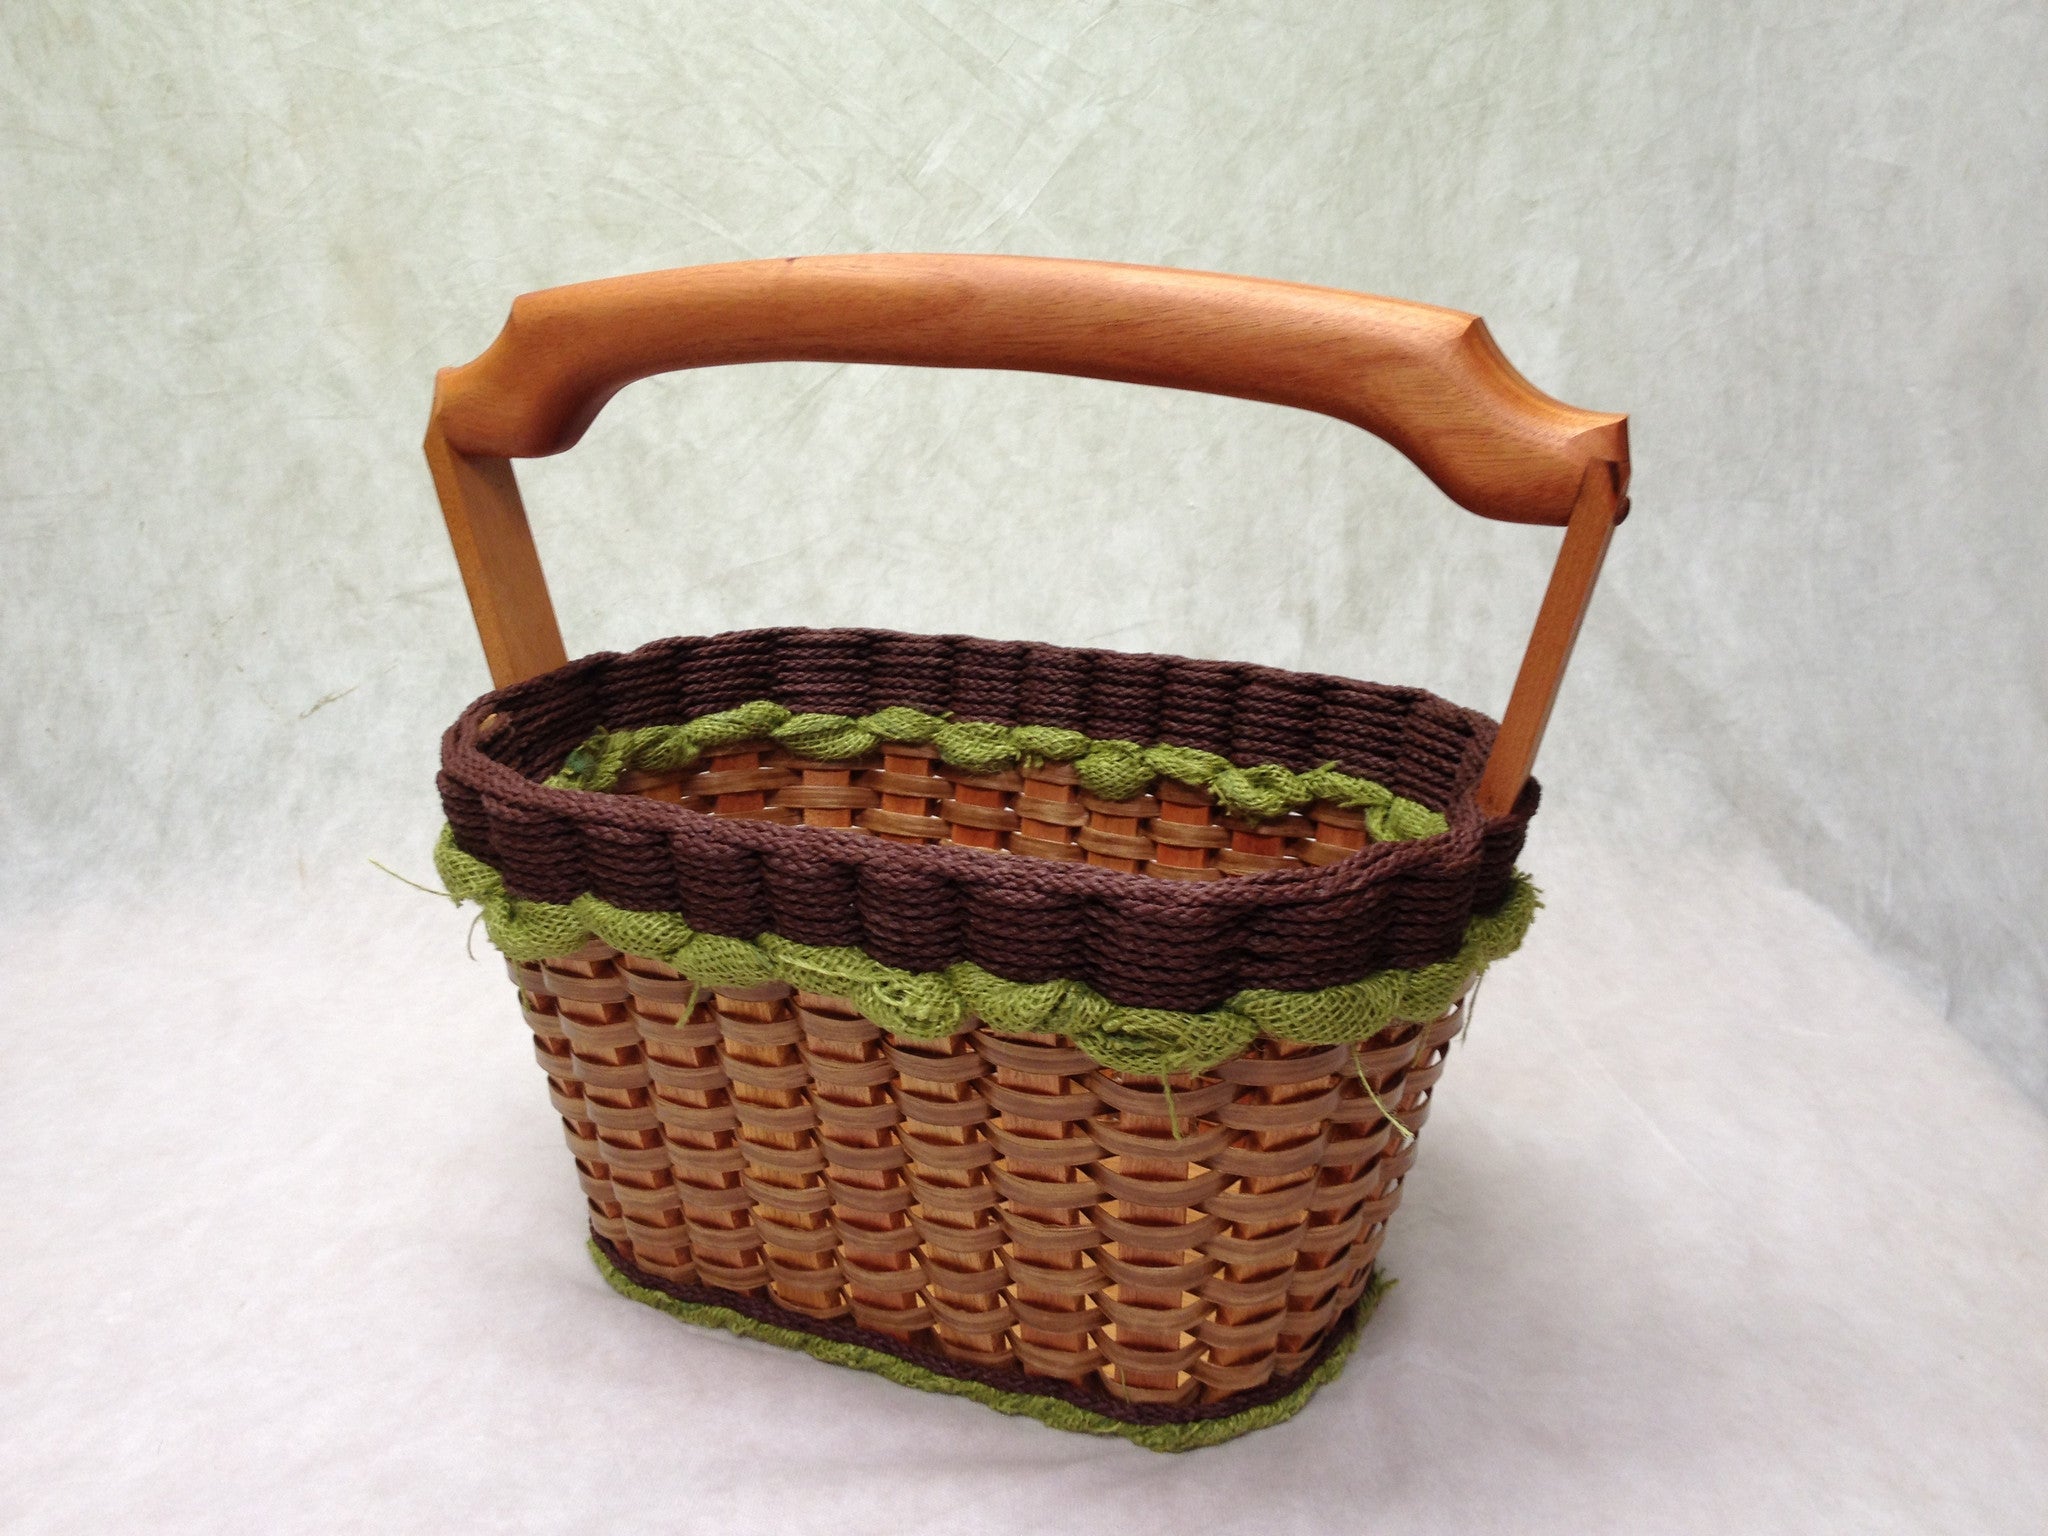 Magazine Basket w/solid burlap colors-Shabby Chic Collection